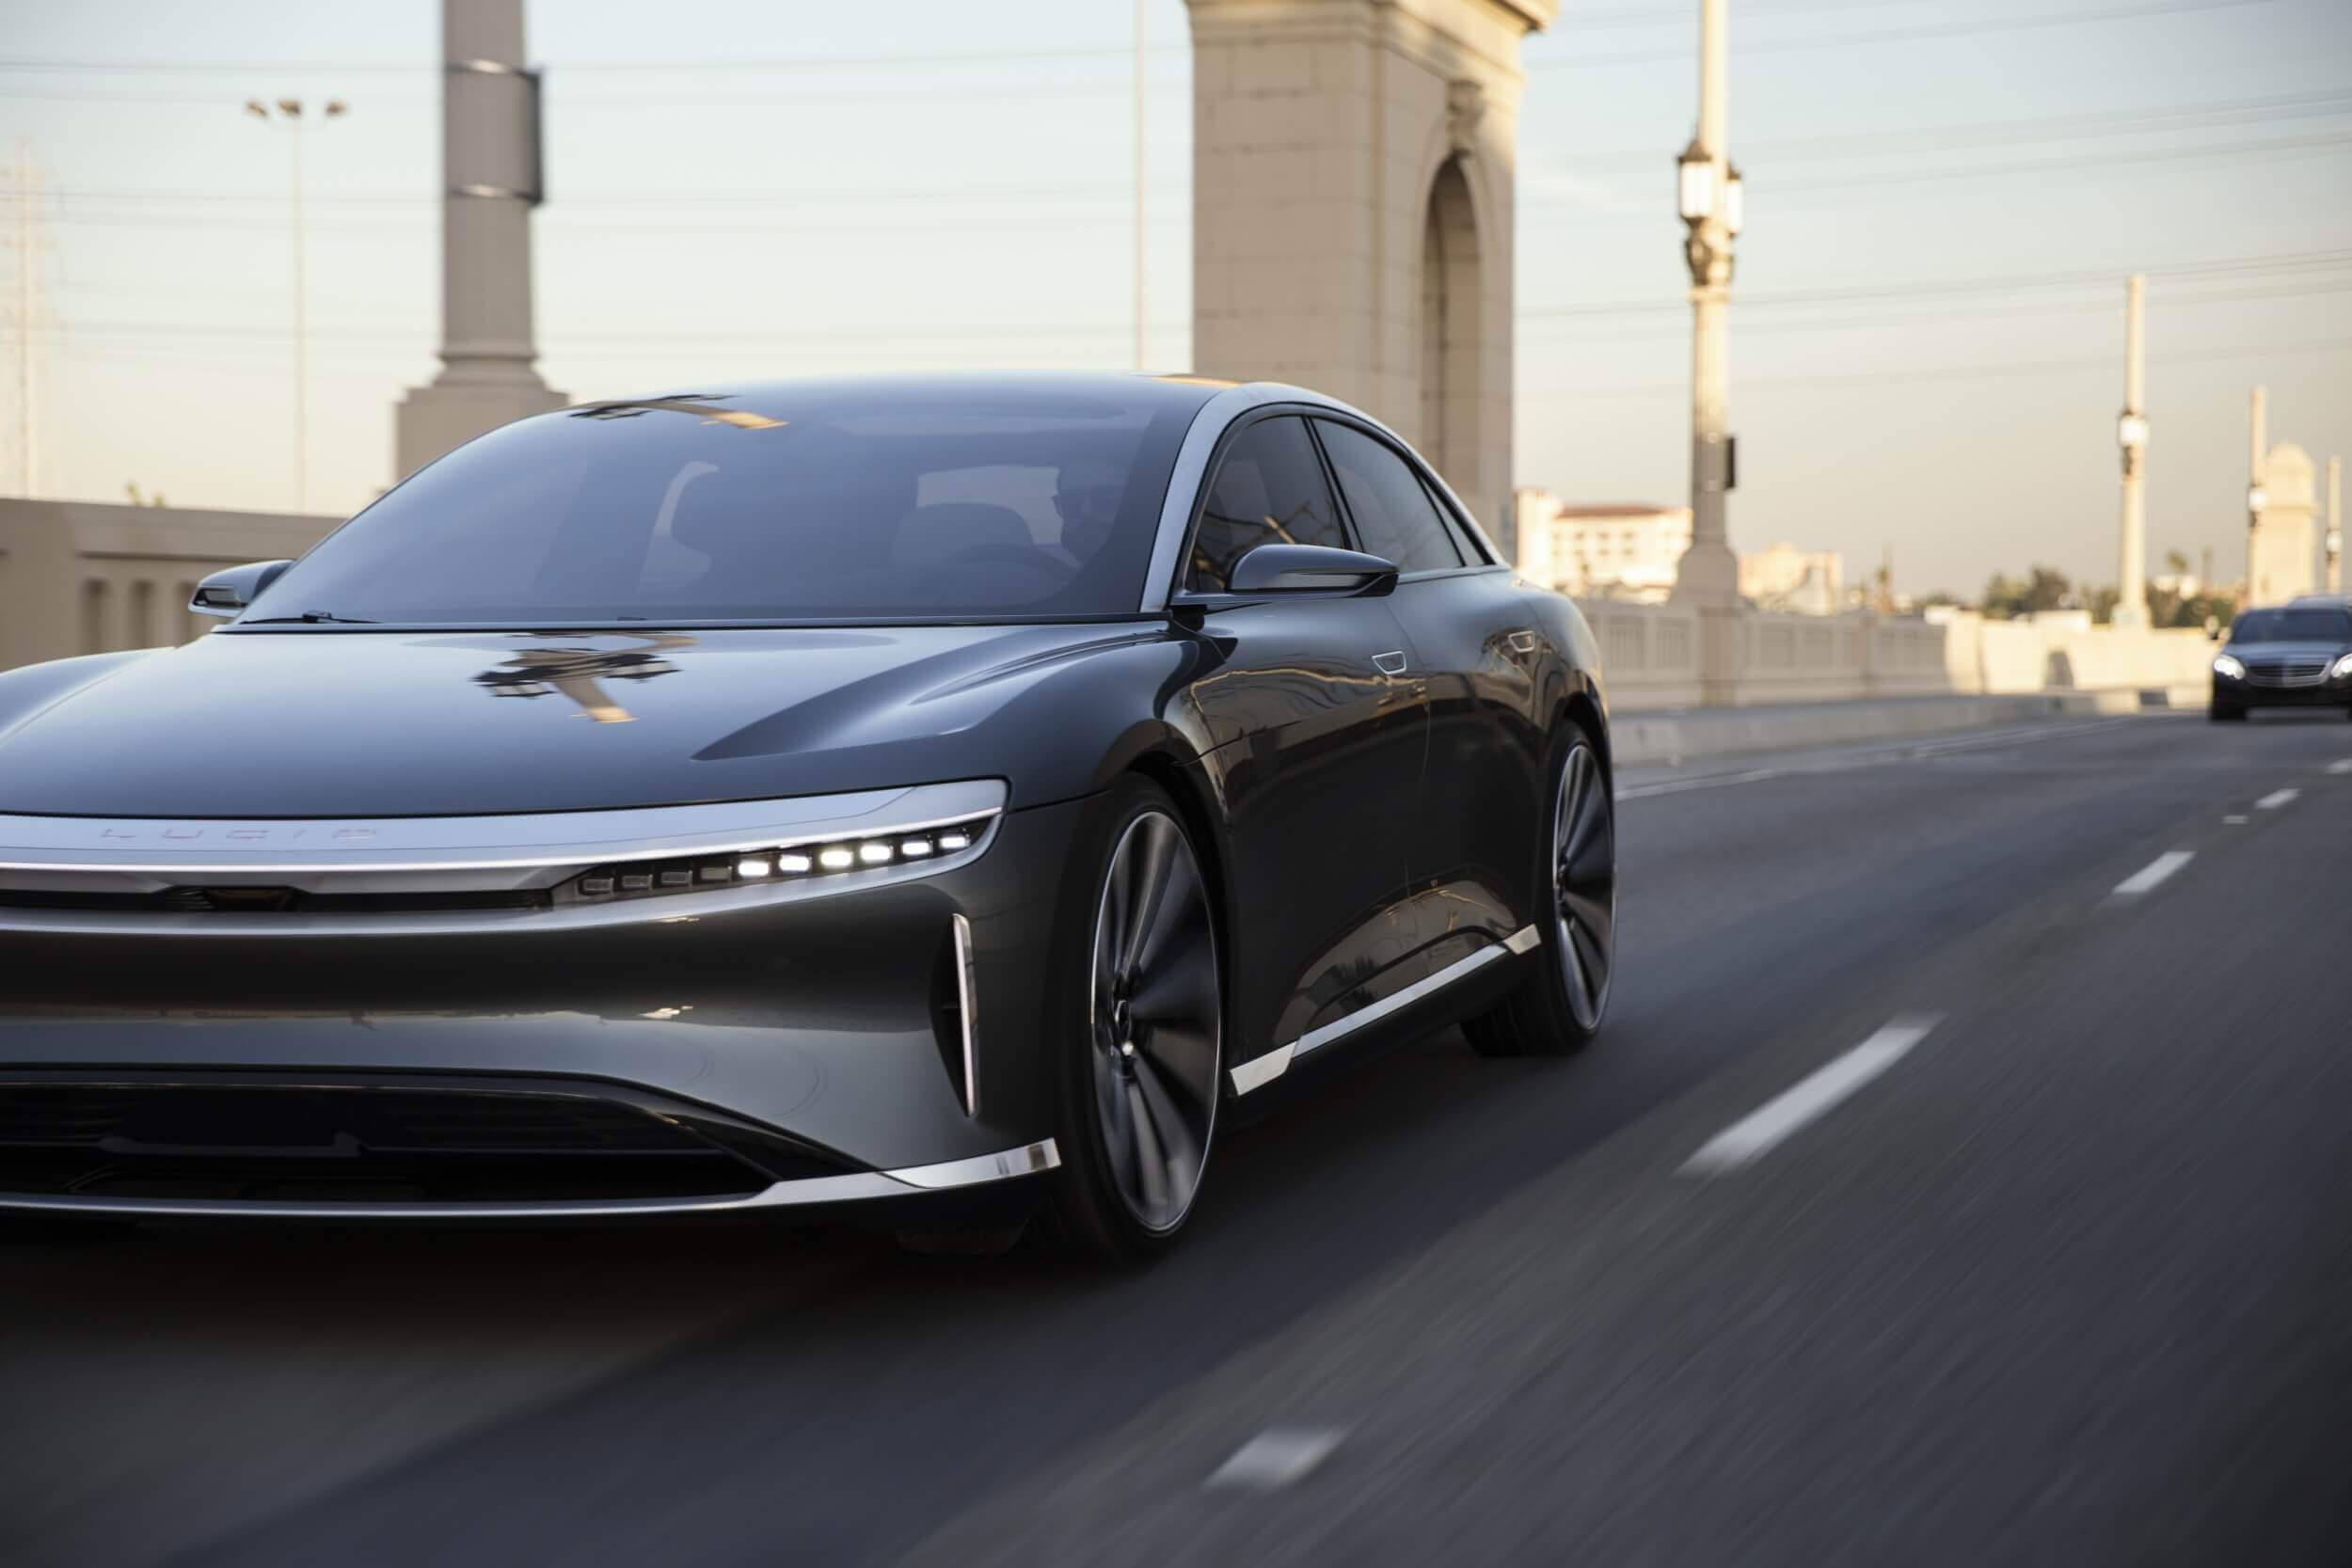 Lucid Motors says its all-electric Air sedan will have a range of 517 miles